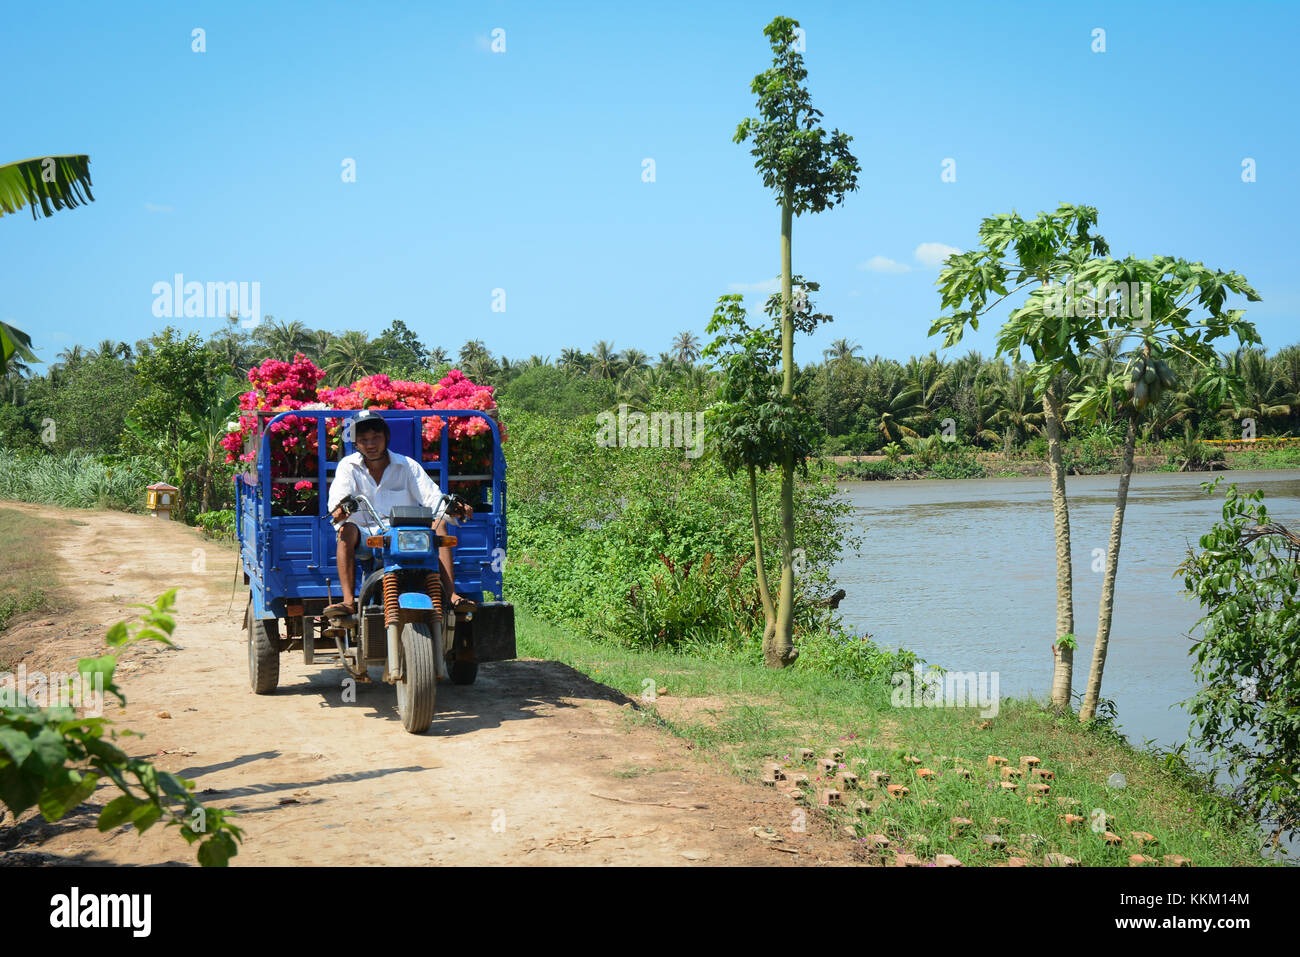 Ben Tre, Vietnam - Jan 31, 2015. People carrying flowers to the market in Ben Tre, Vietnam. Ben Tre is a province in the Mekong Delta area of southern Stock Photo